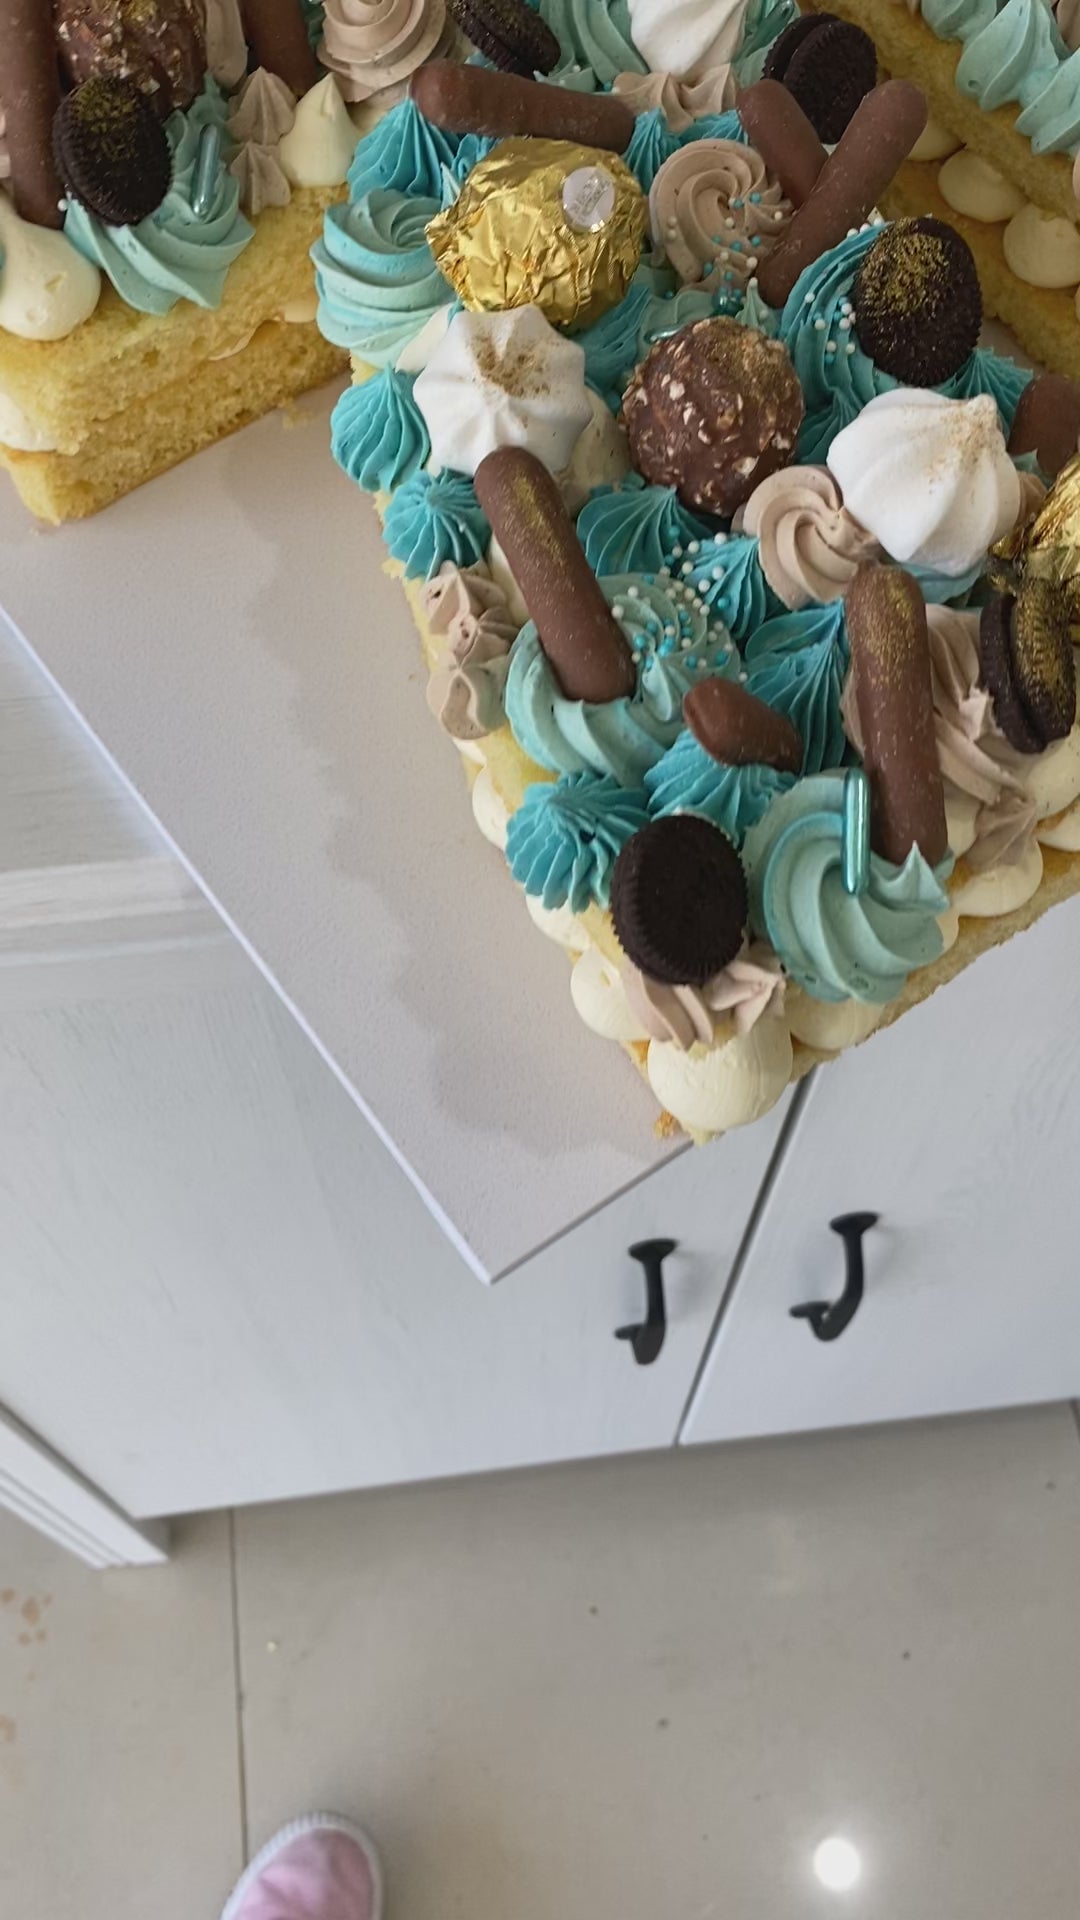 Blue’s pair - 2 NUMERAL or LETTER cake